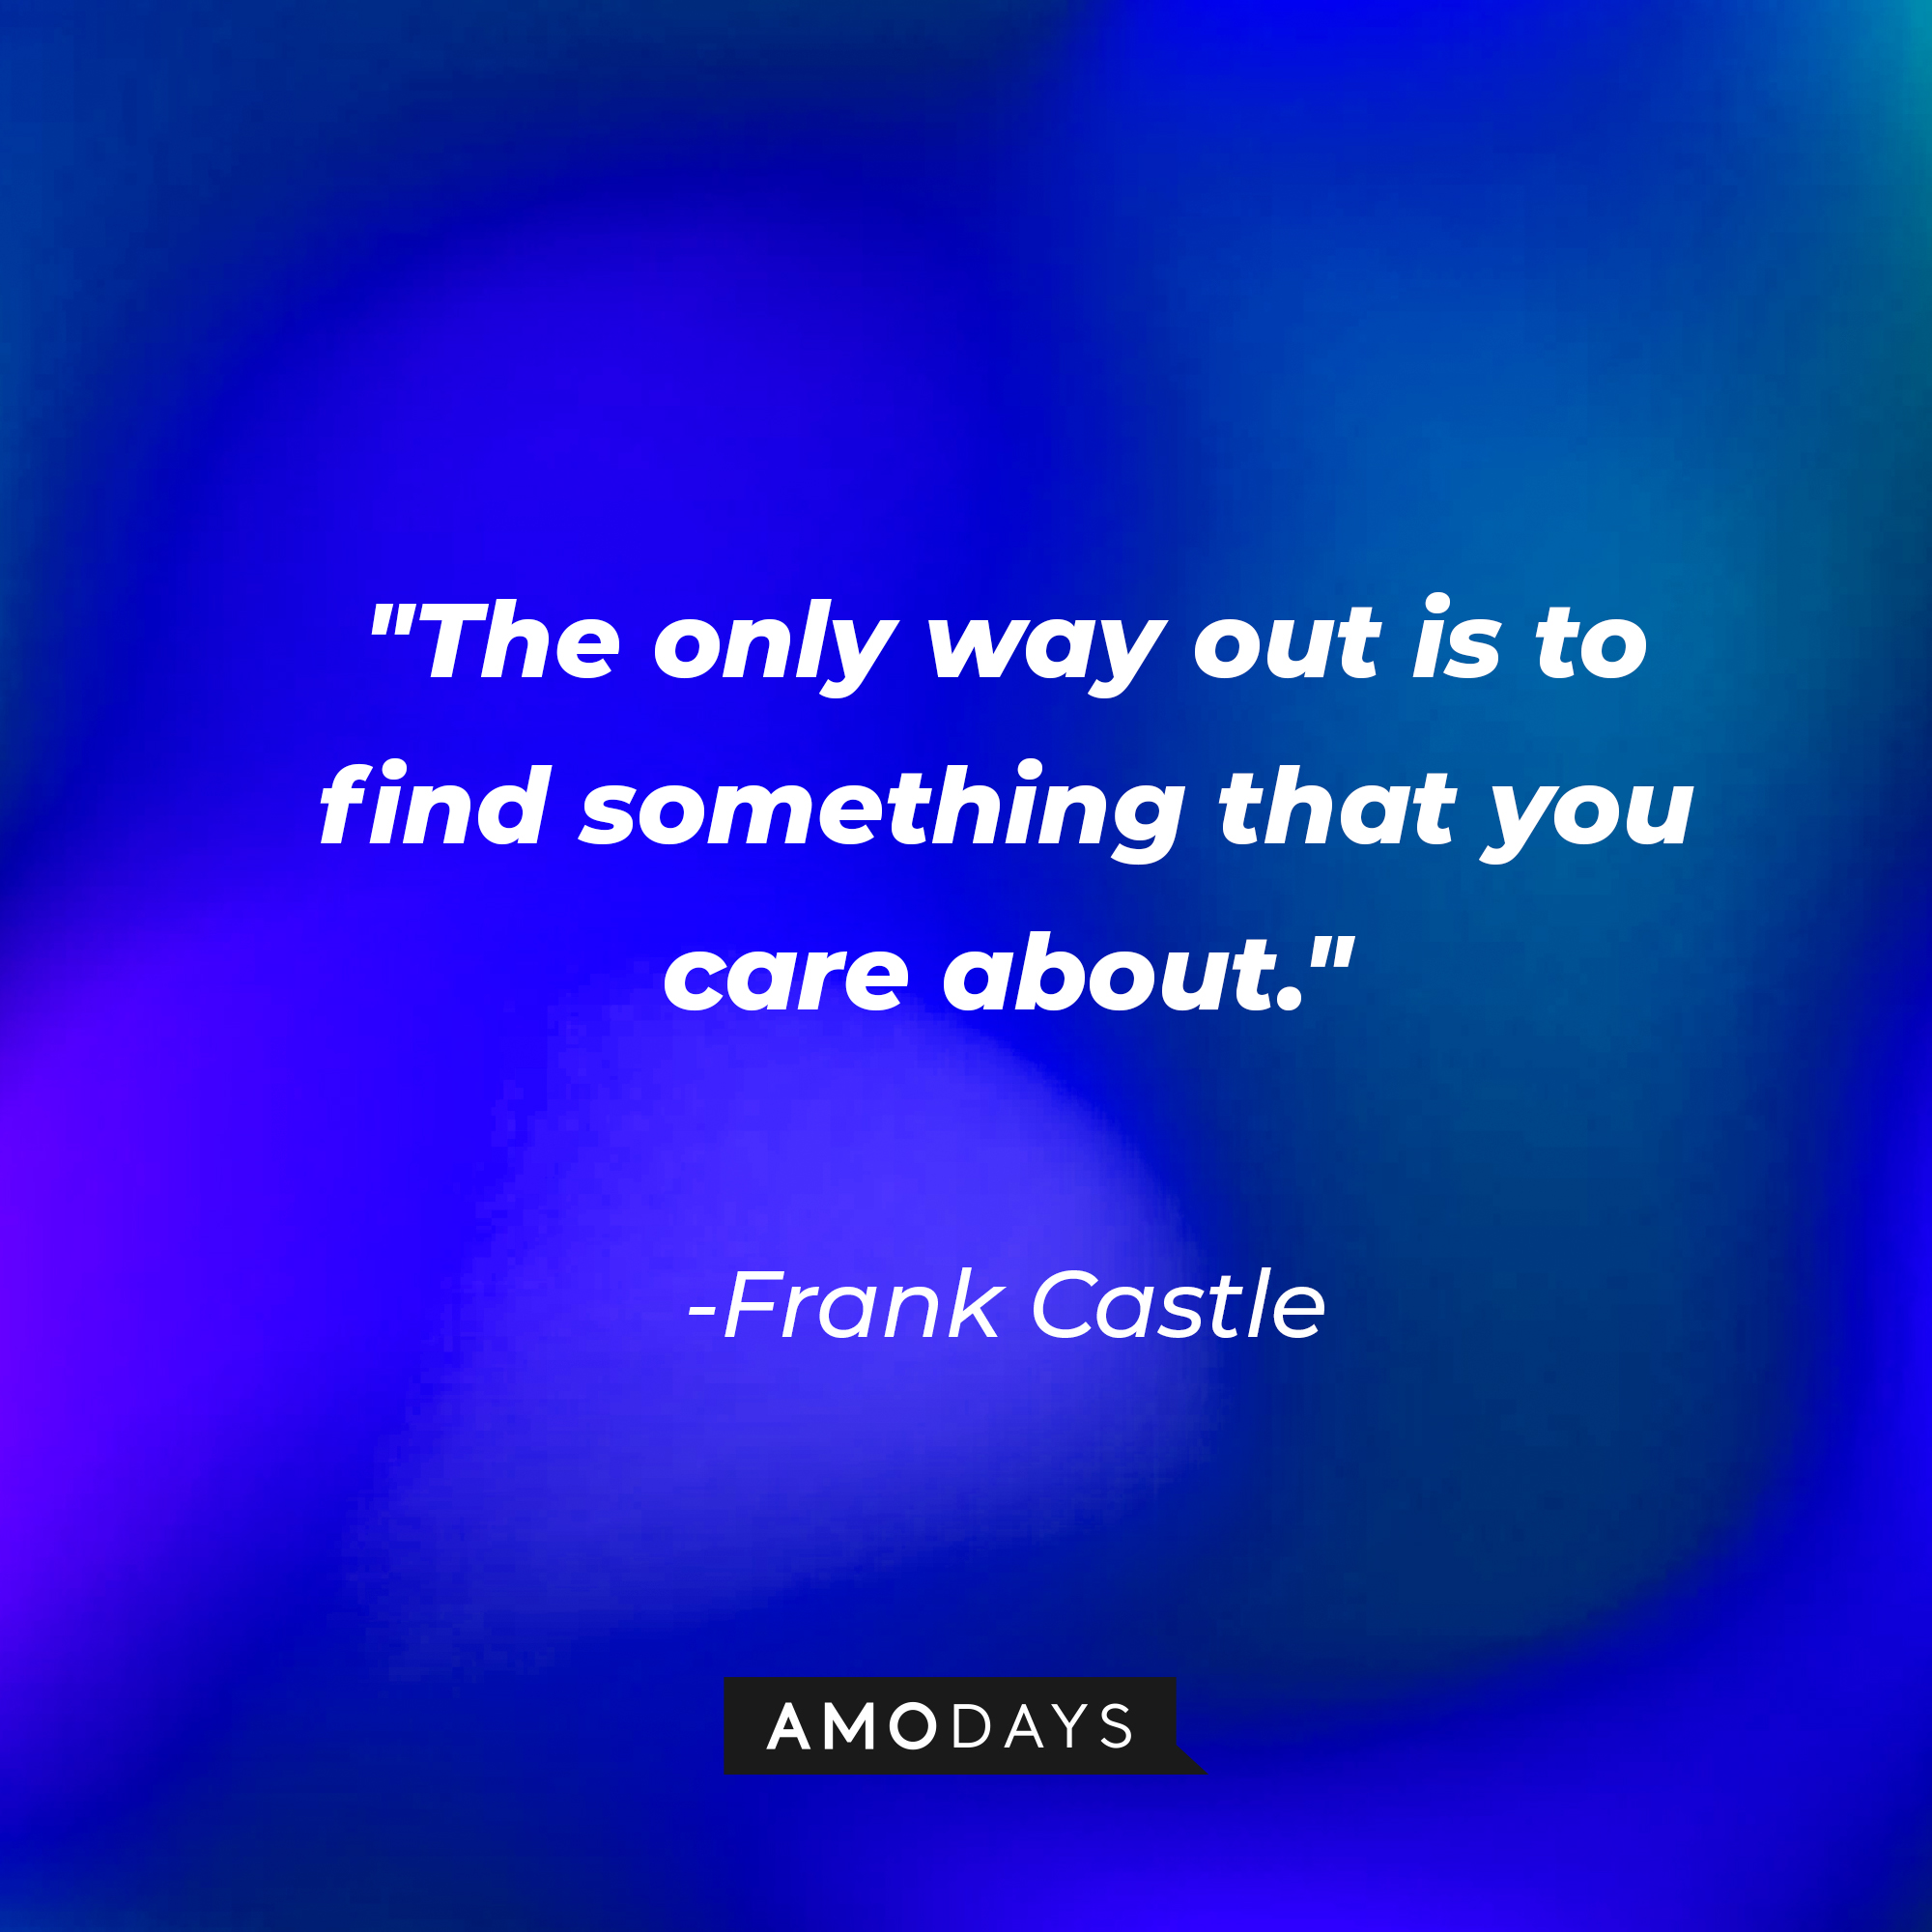 Frank Castle's quote: "The only way out is to find something that you care about." | Source: AmoDays